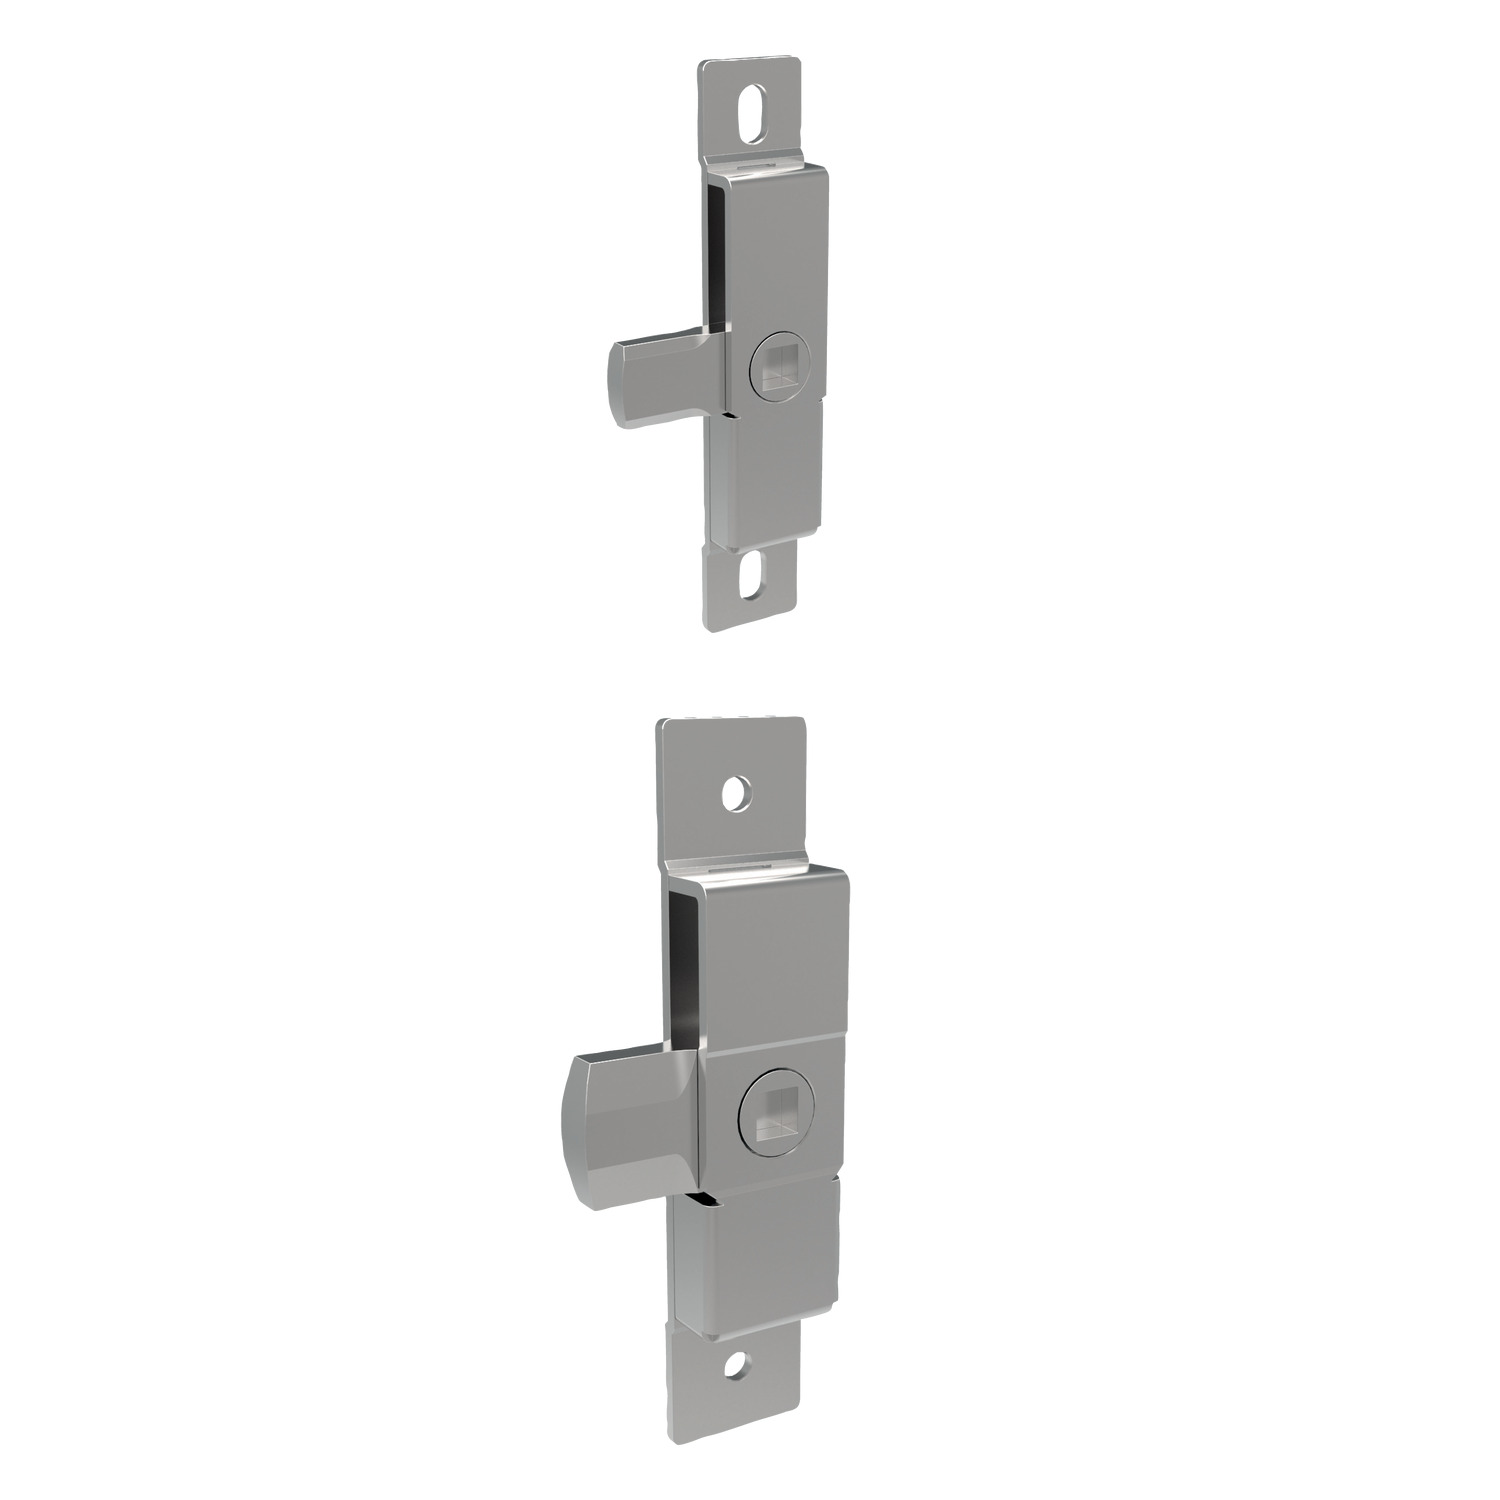 A1546.AW0012 Panel Latches square driver - steel